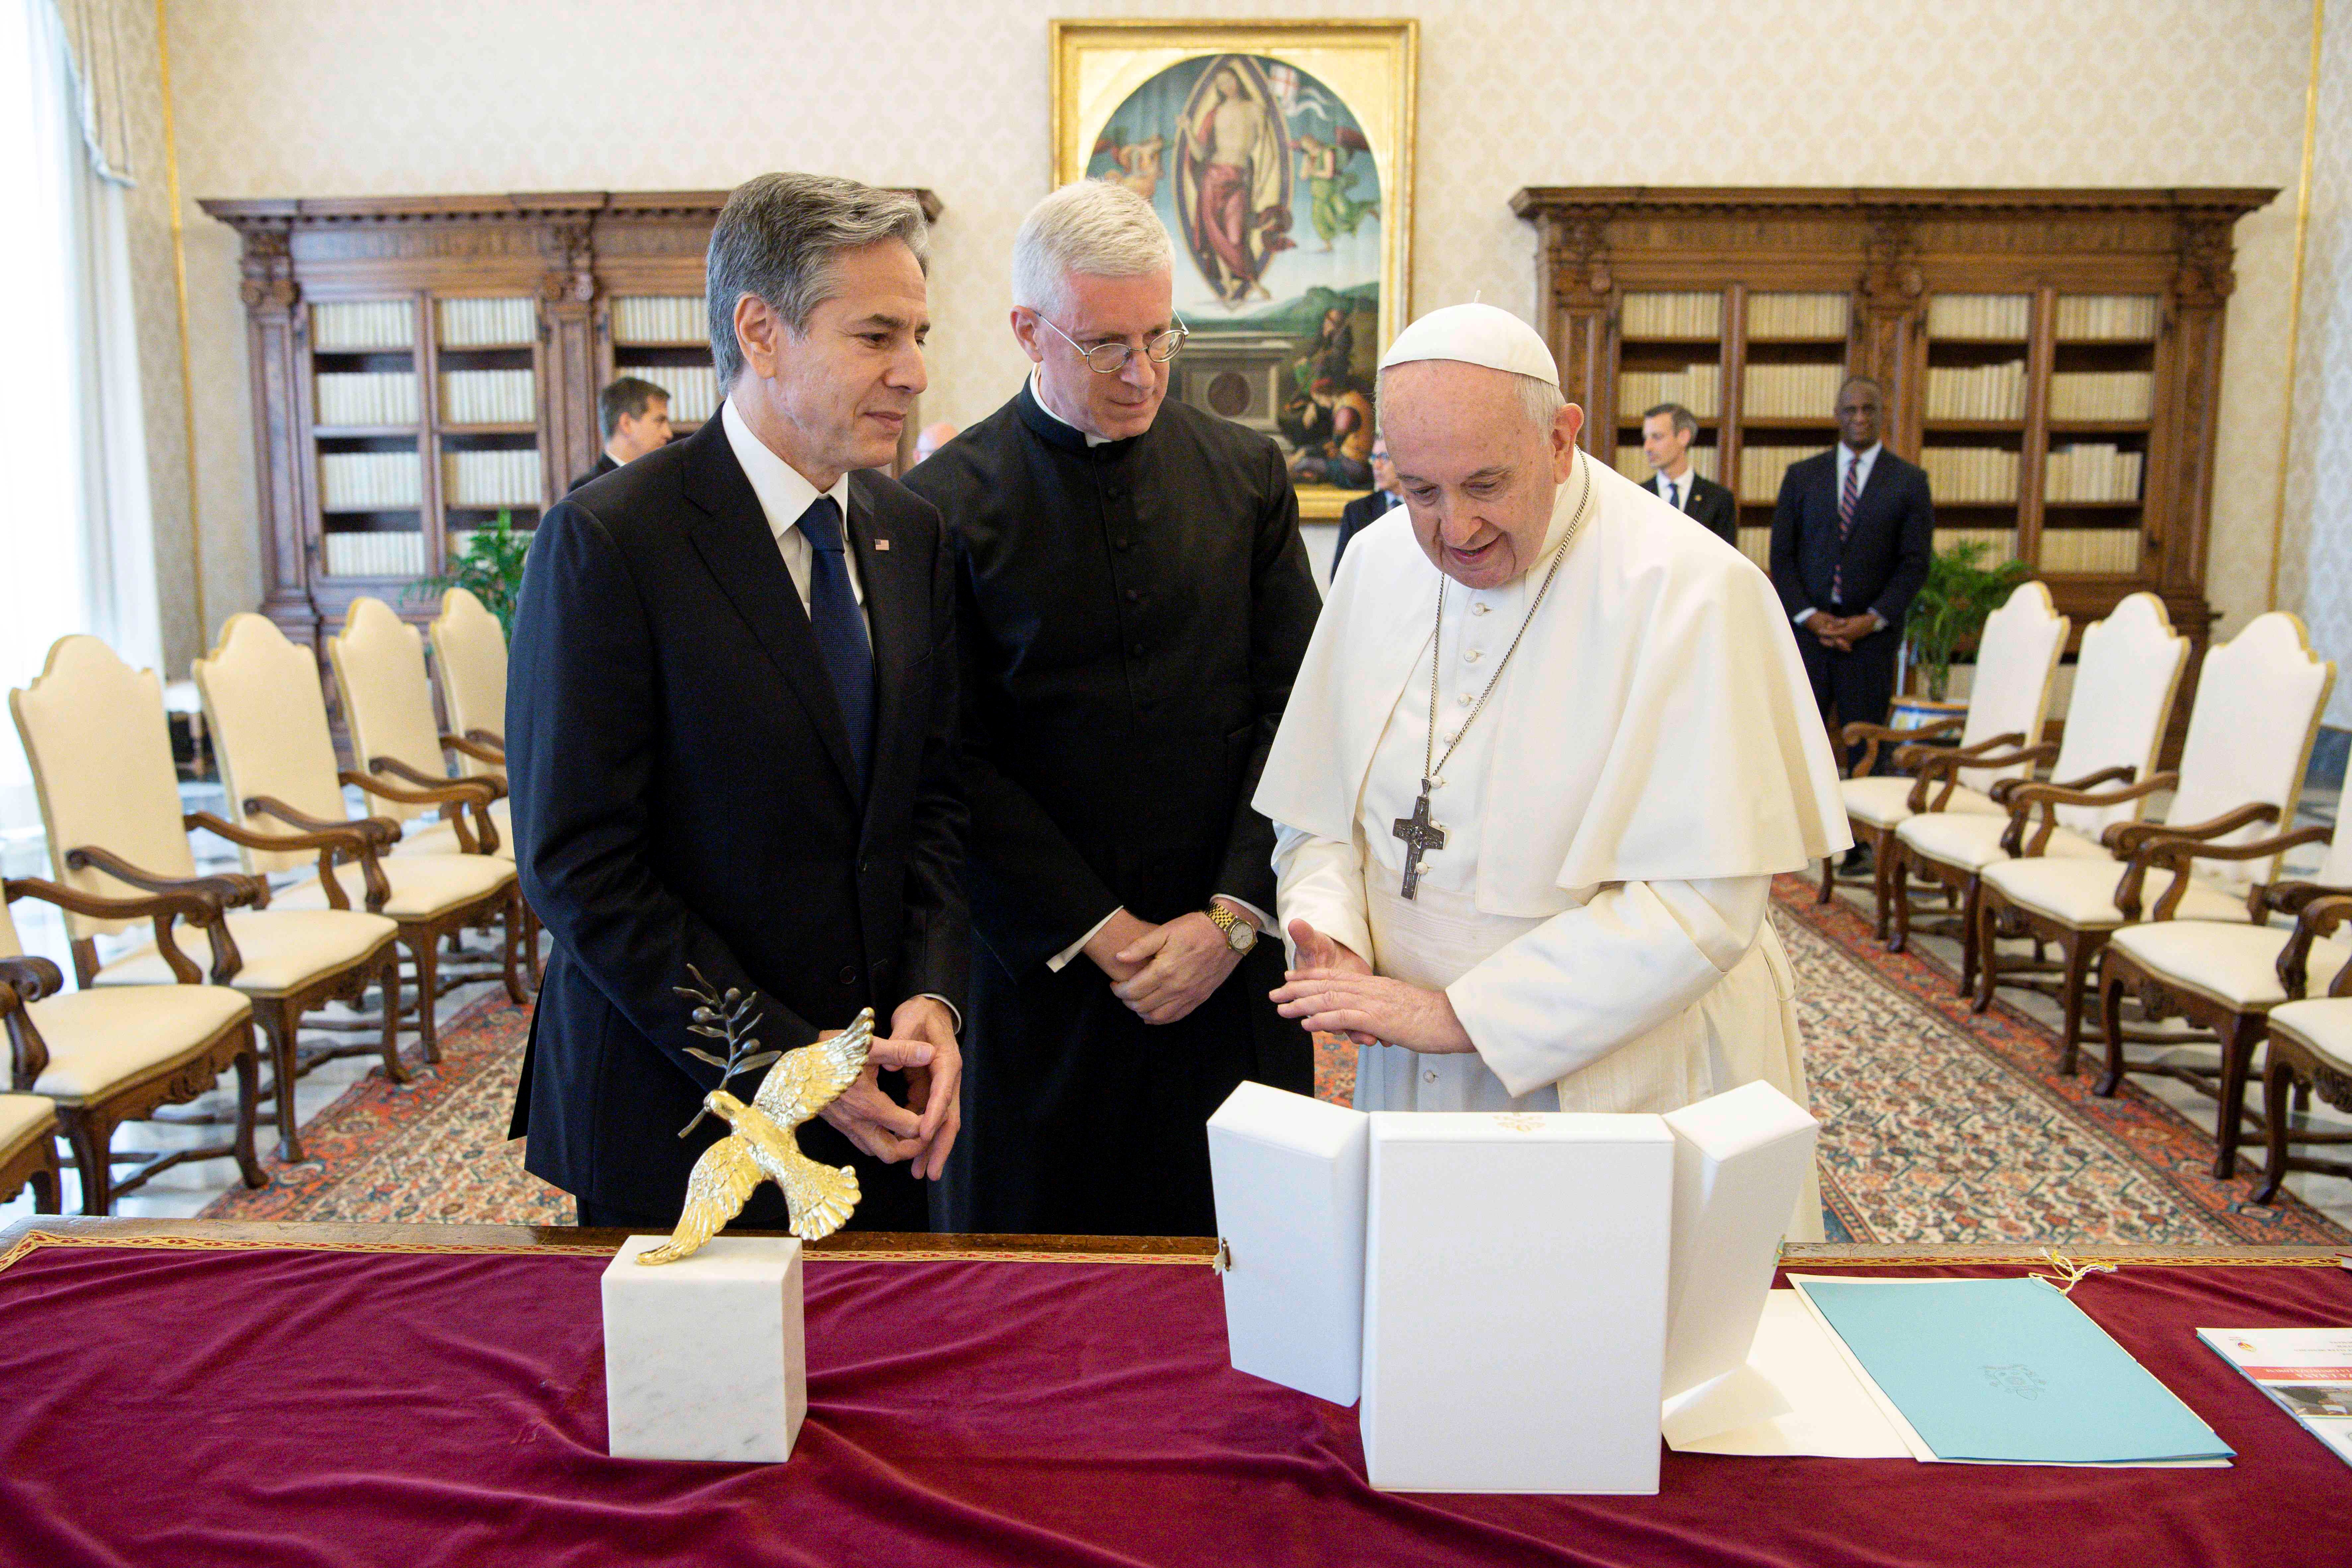 Pope Francis meets with U.S. Secretary of State Antony Blinken at the Vatican